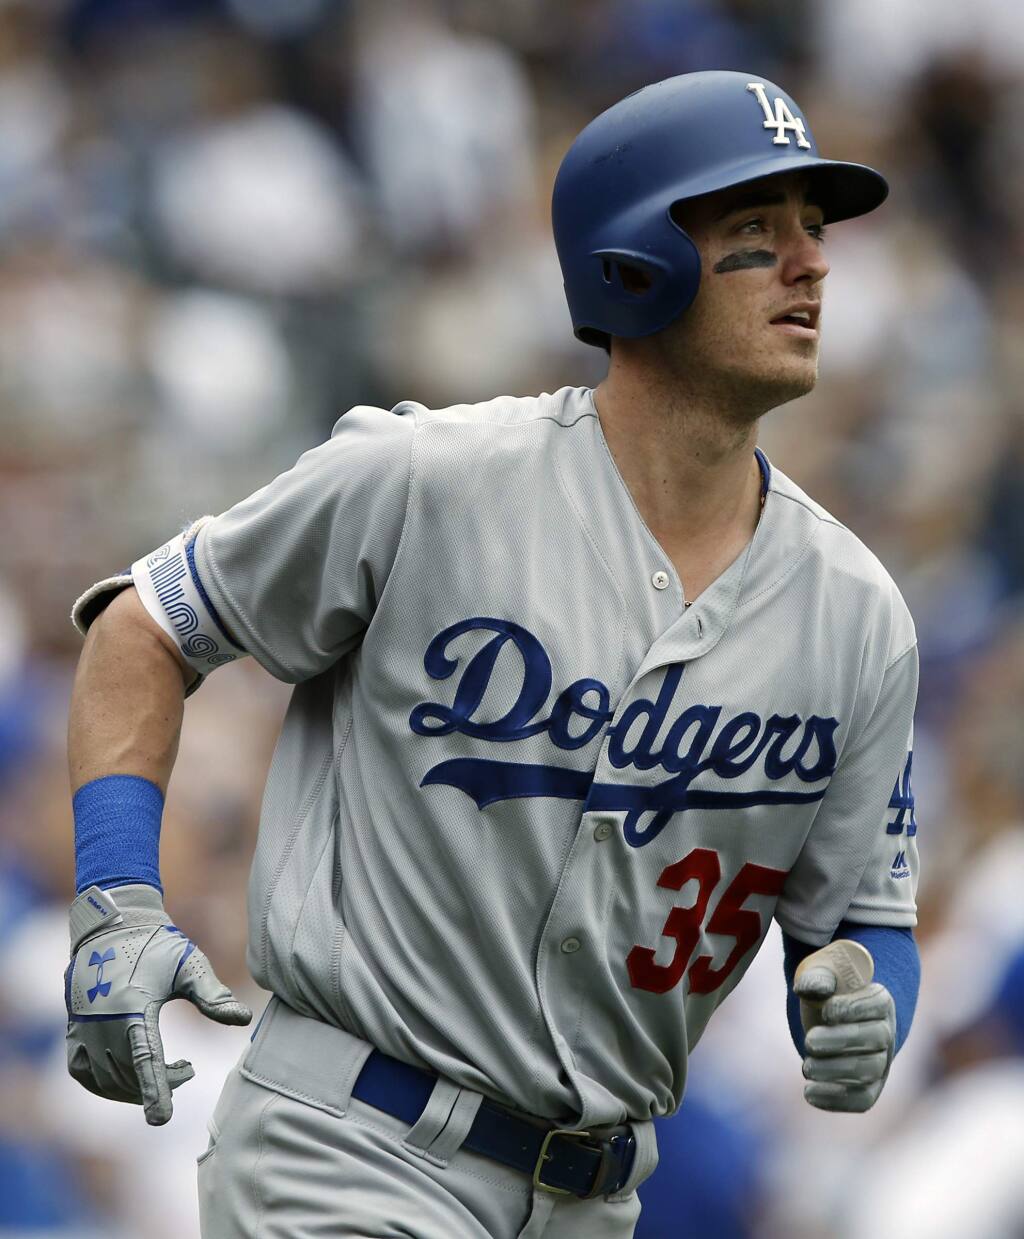 Los Angeles Dodgers' Cody Bellinger named NL Rookie of the Year